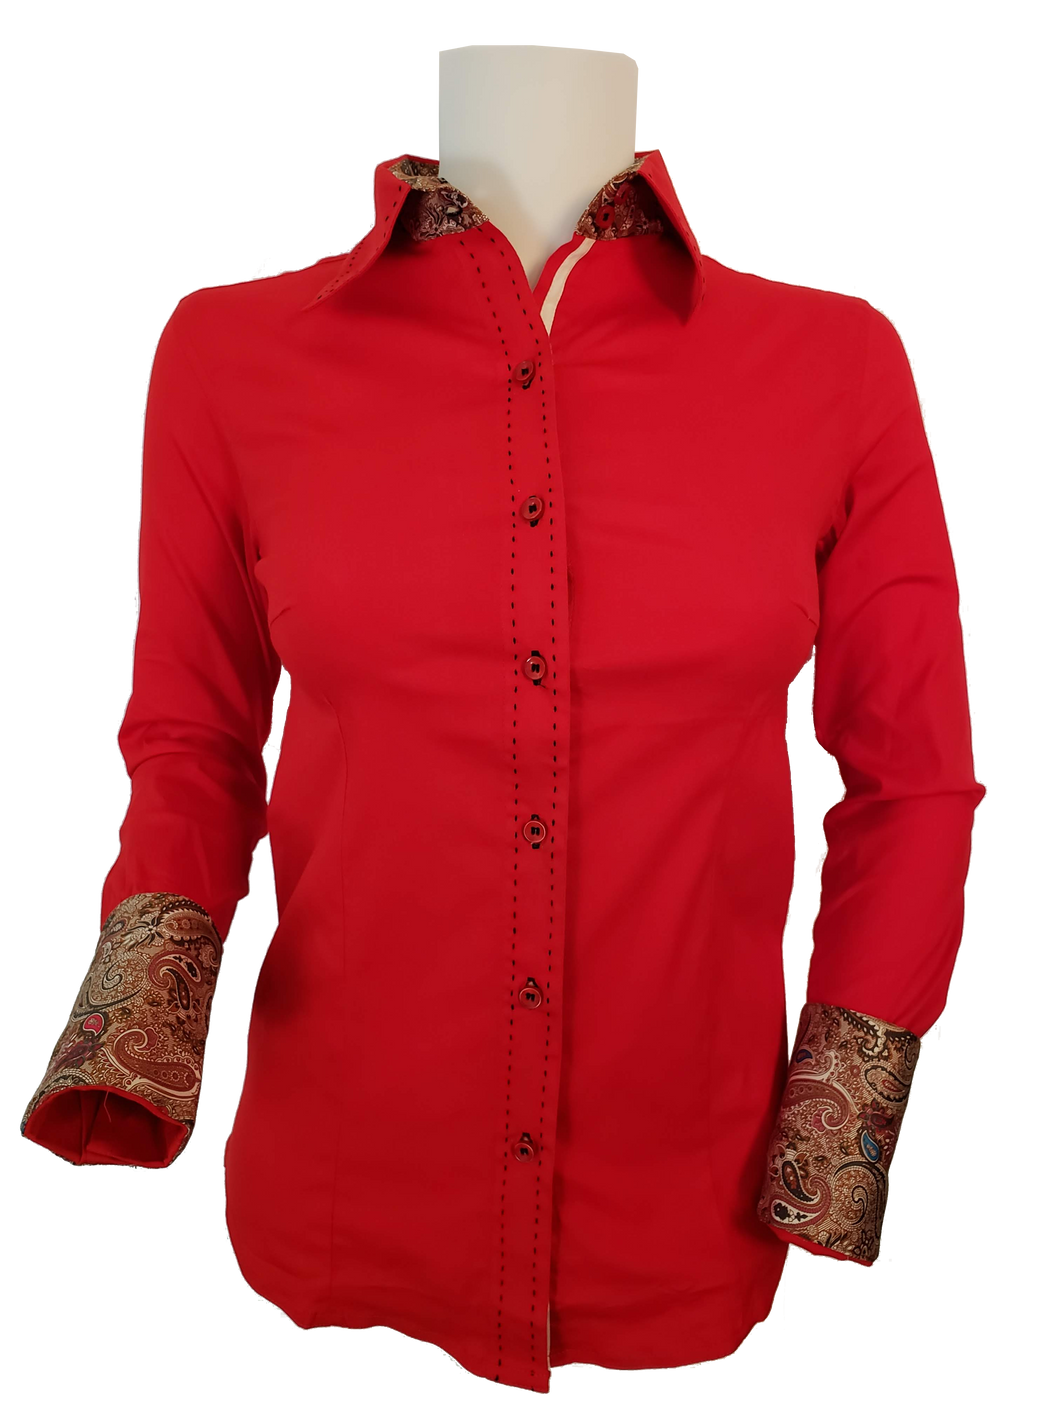 RED CONTRAST SHIRT